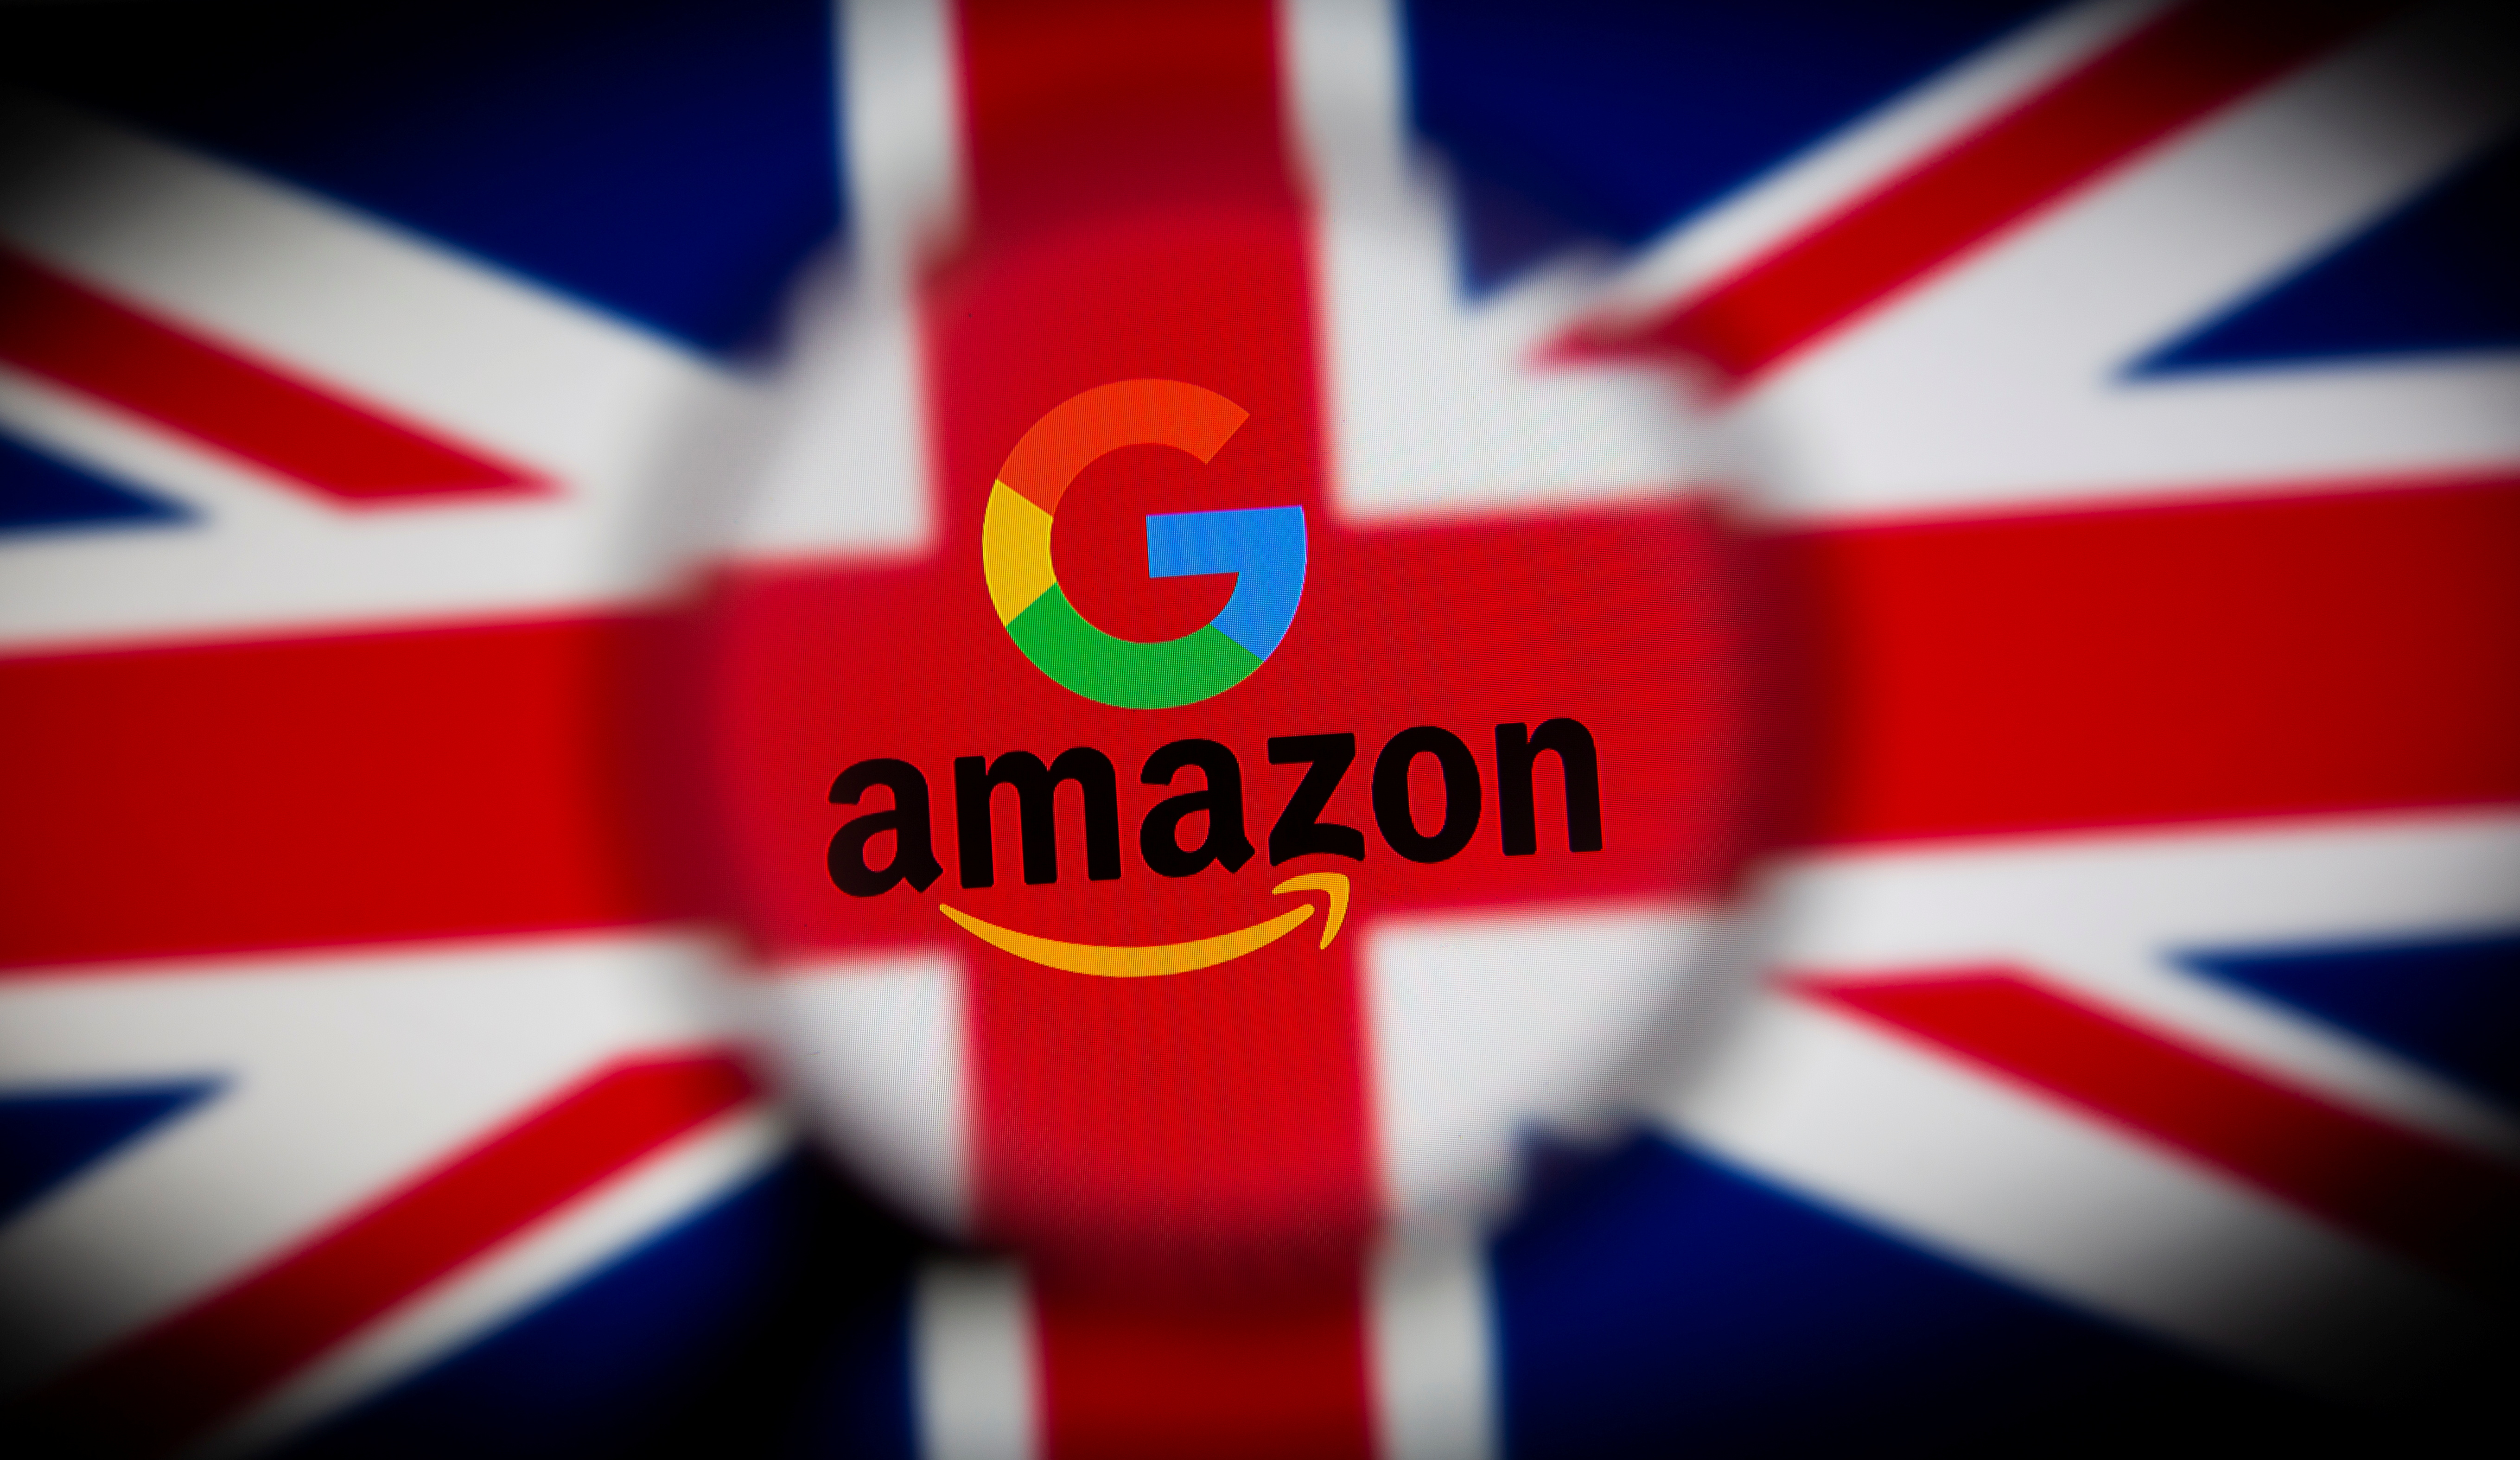 UK flag, Google and Amazon logos are seen displayed through magnifier in this illustration picture